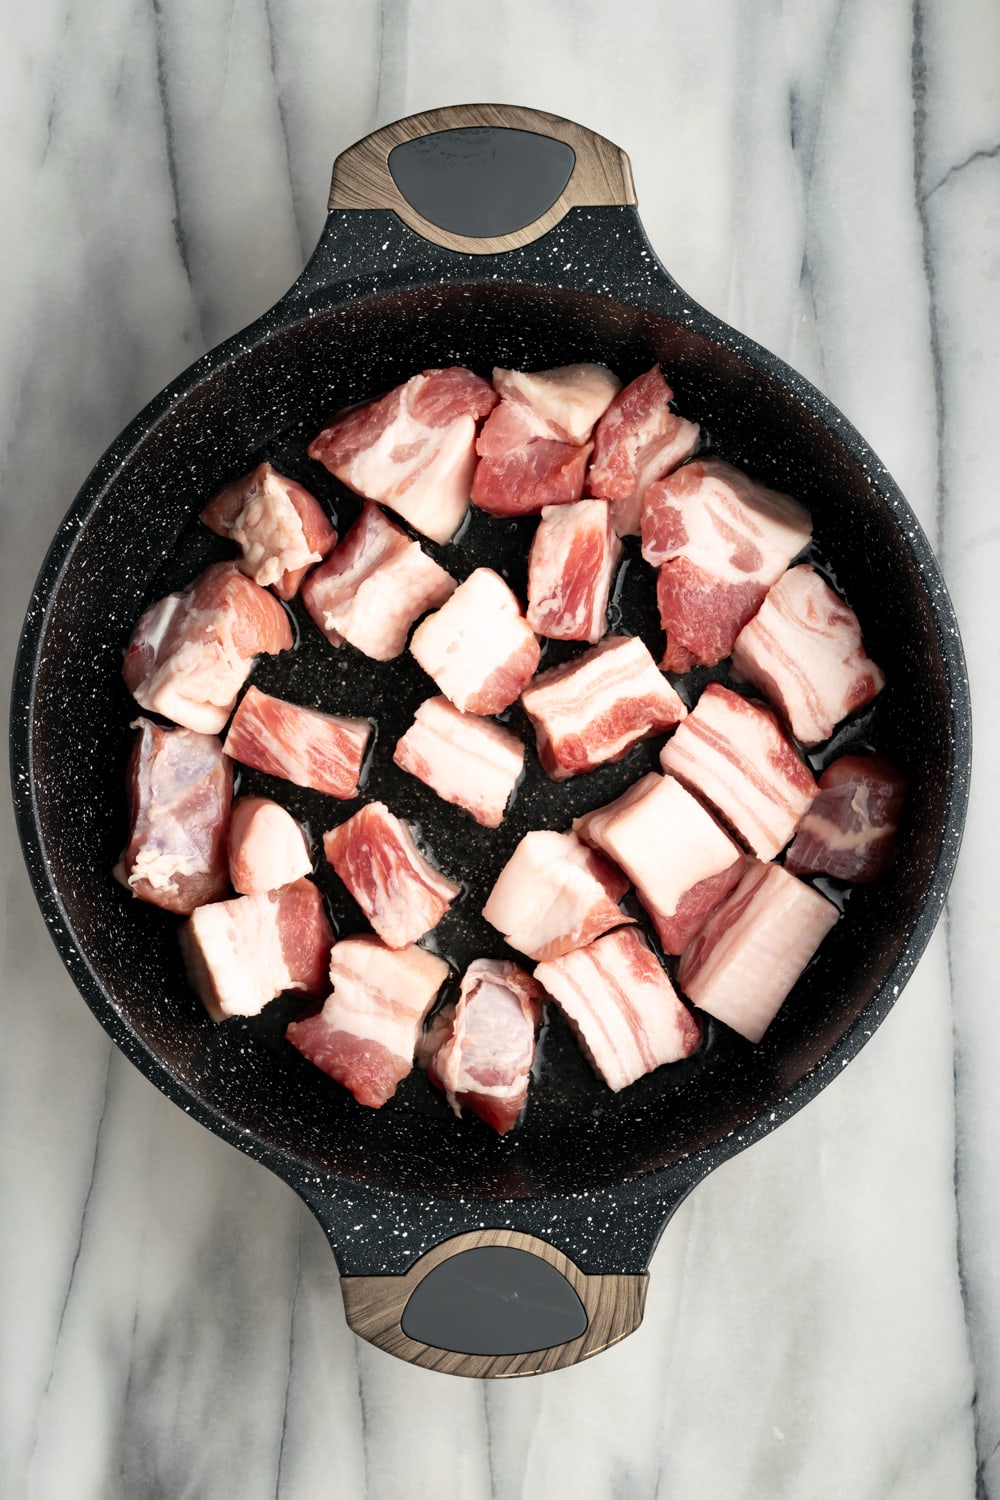 Uncooked pork belly pieces in a cast iron pan to make chicharrones de puerco on a marble countertop